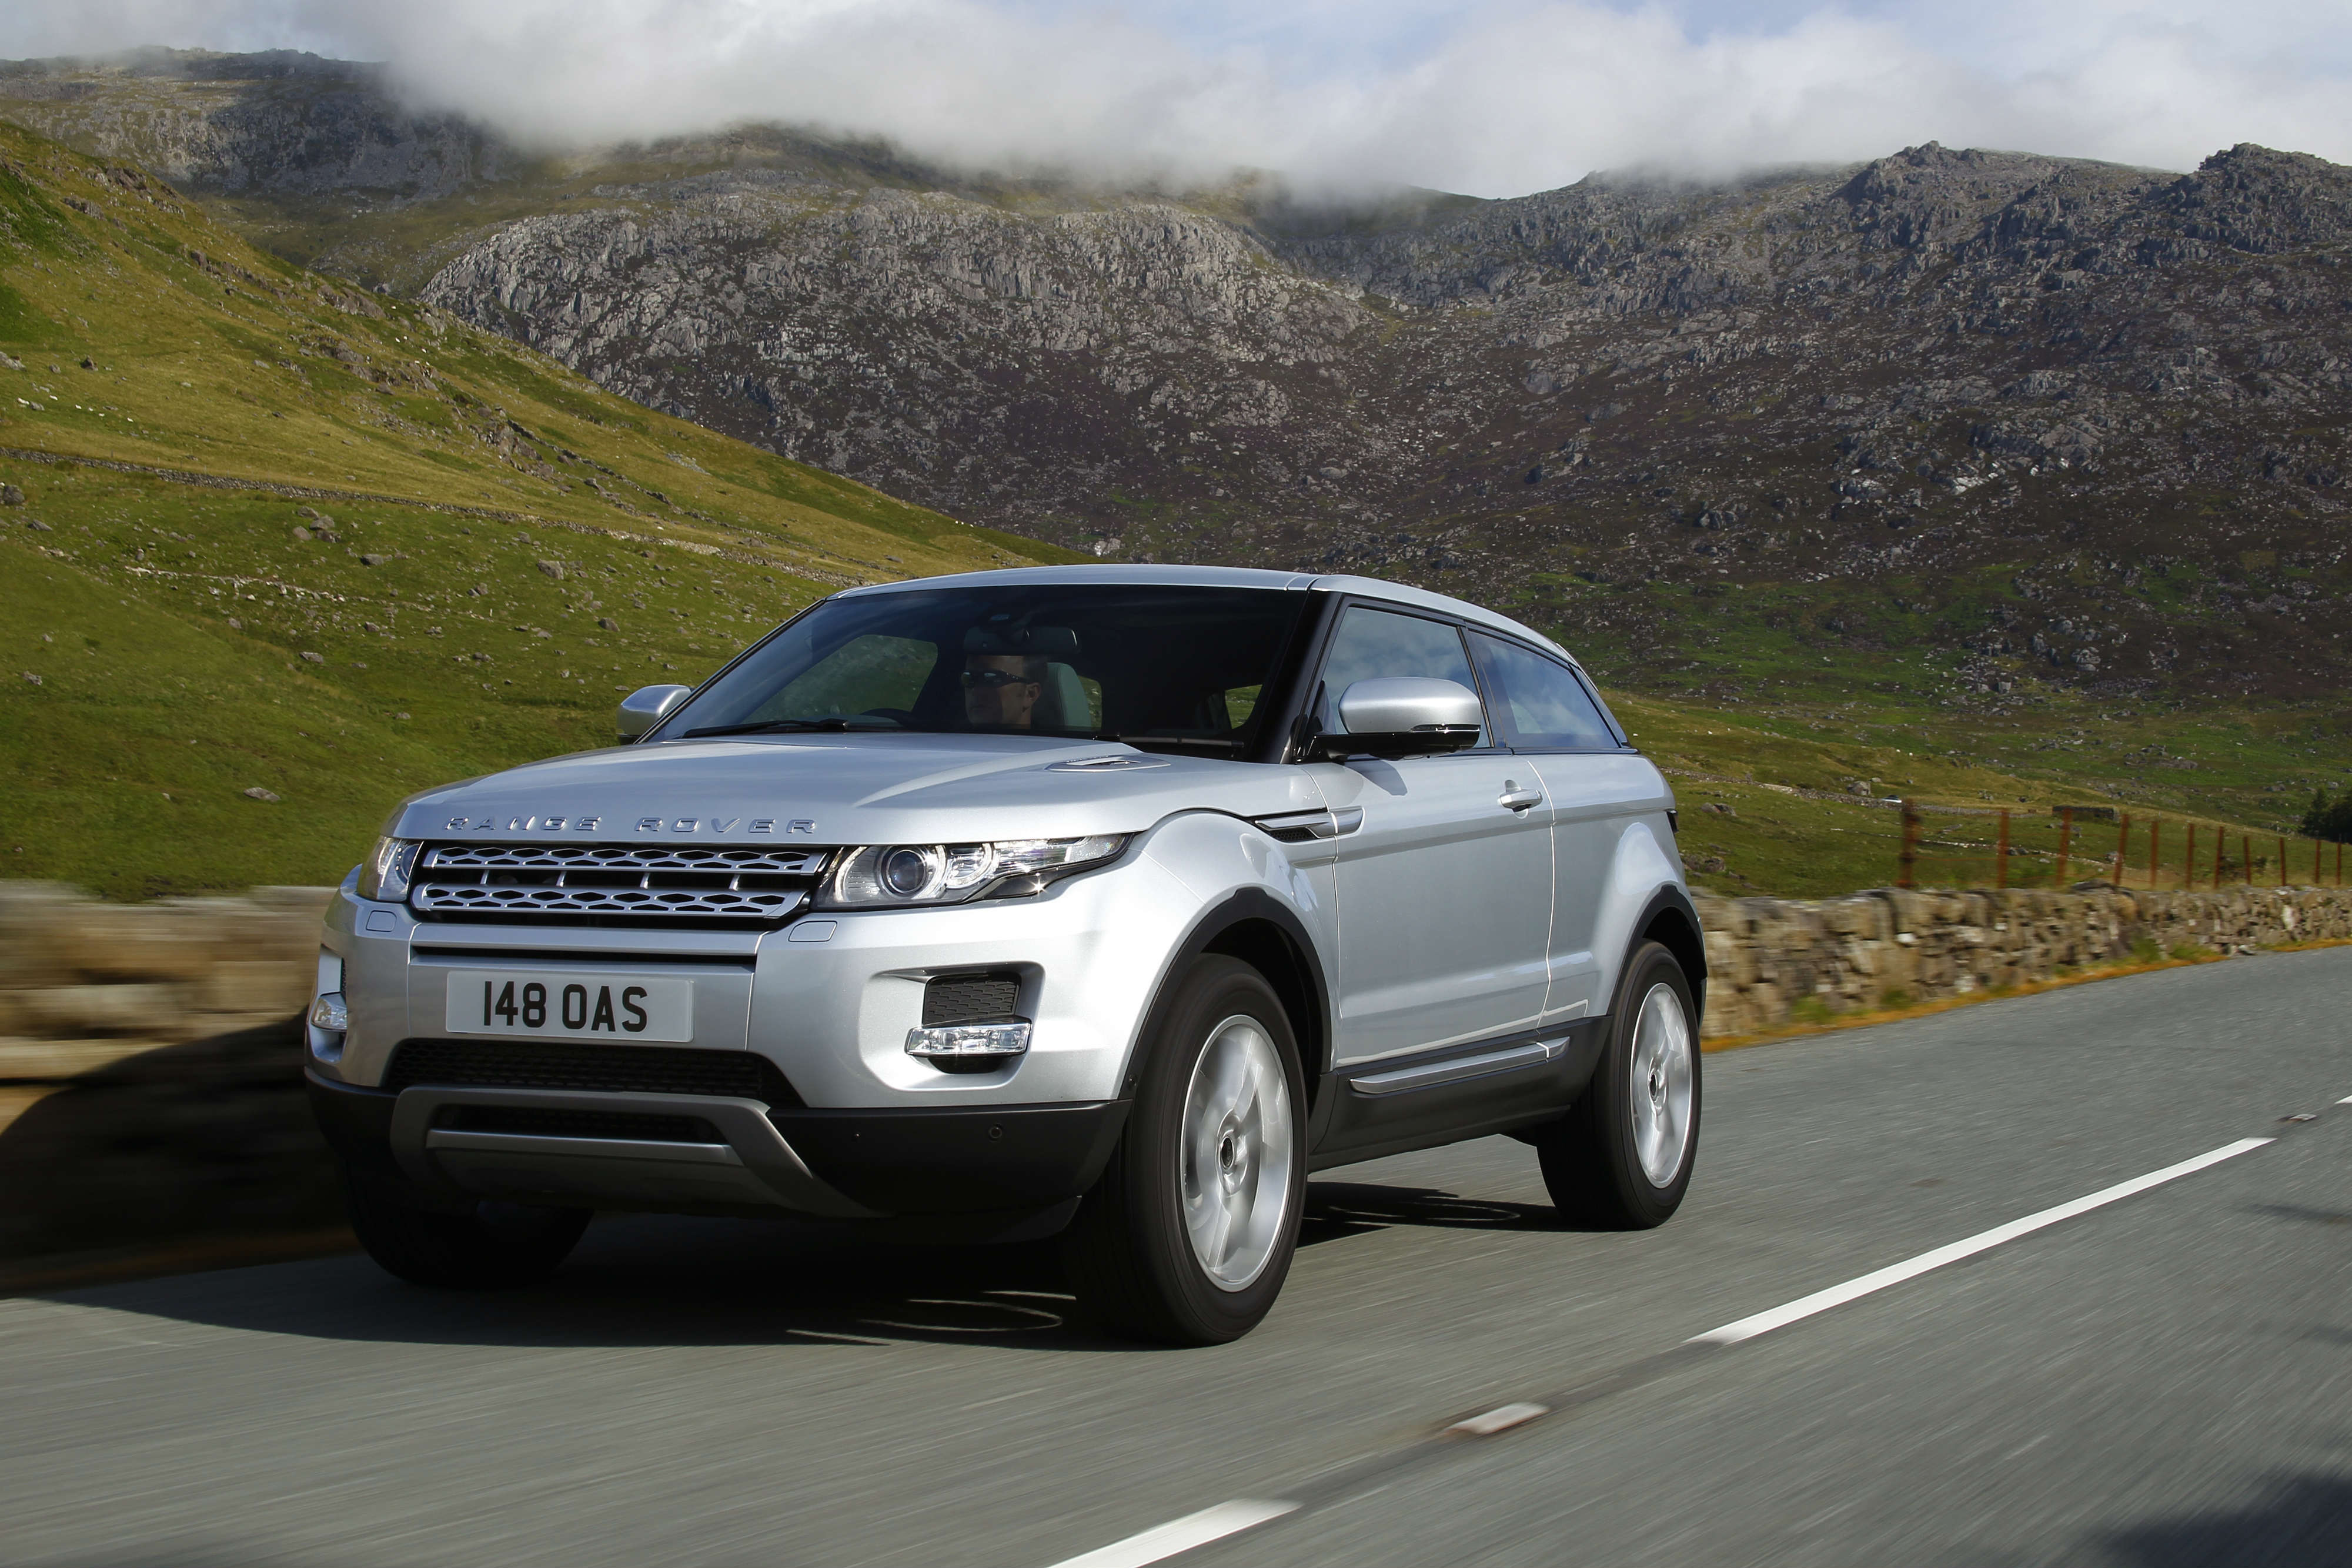 Land Rover and Jaguar introduce two-year used car warranty